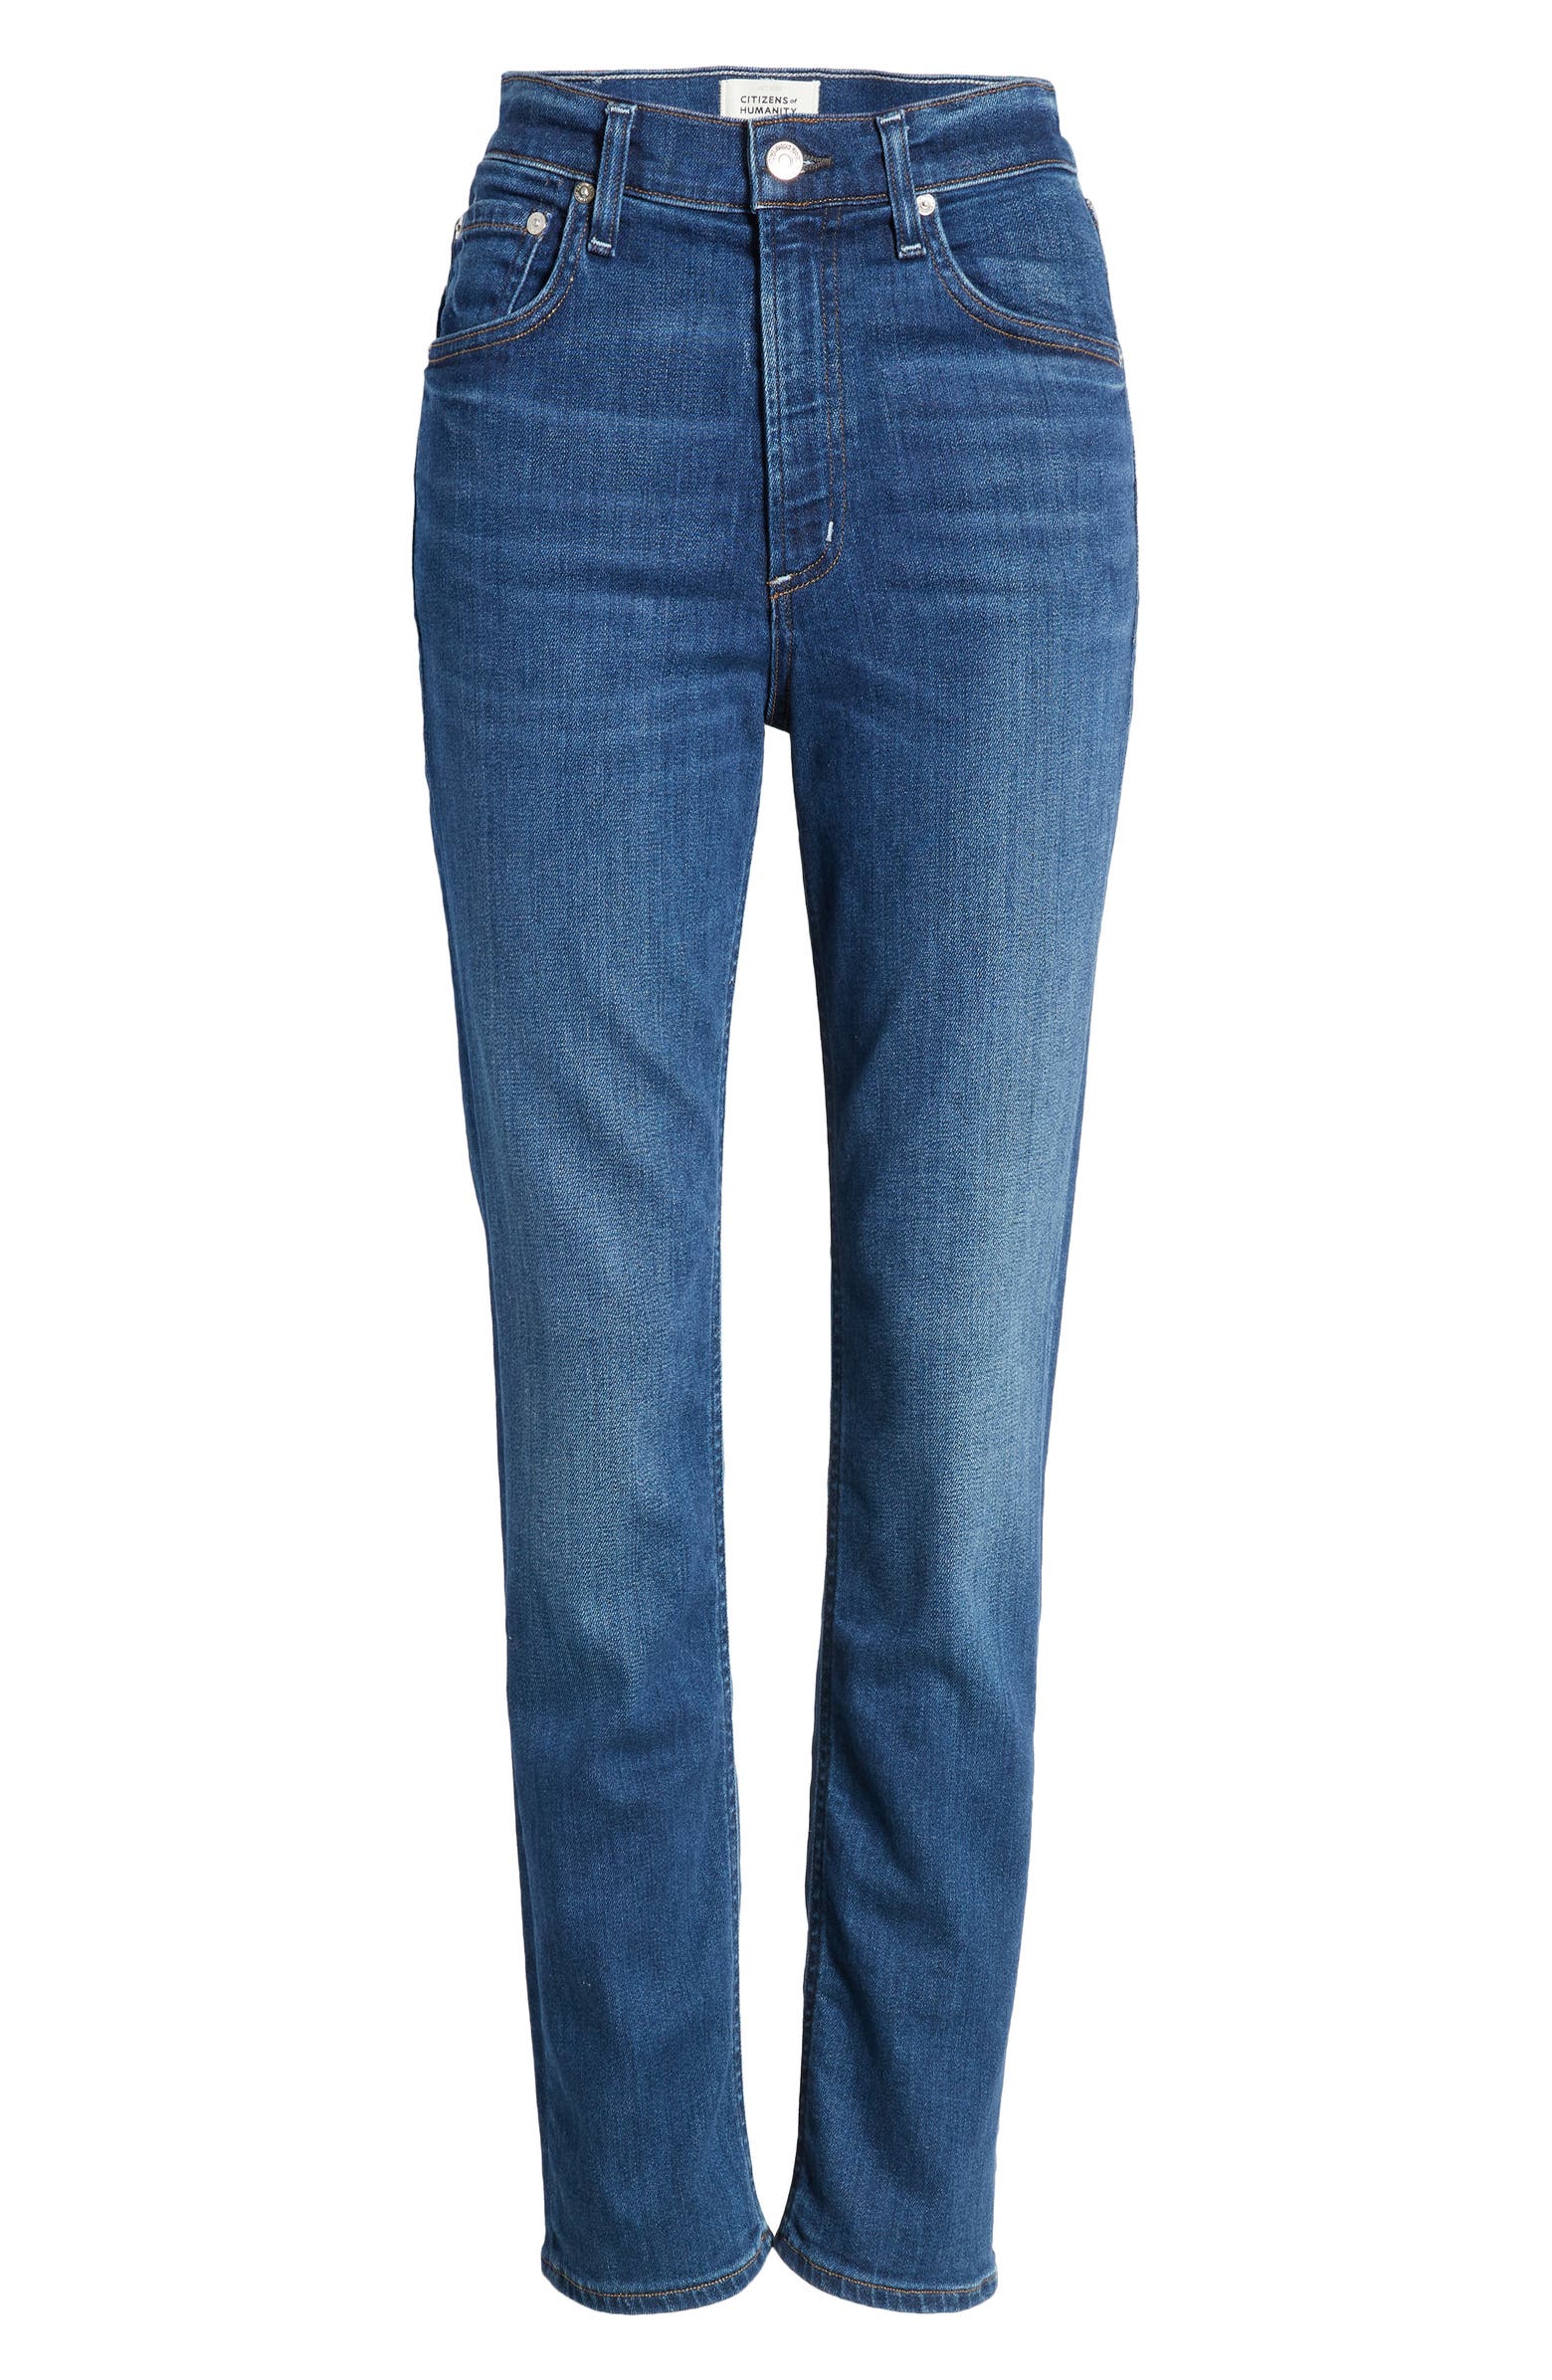 Citizens of Humanity Sloane High Waist Skinny Jeans | Nordstrom